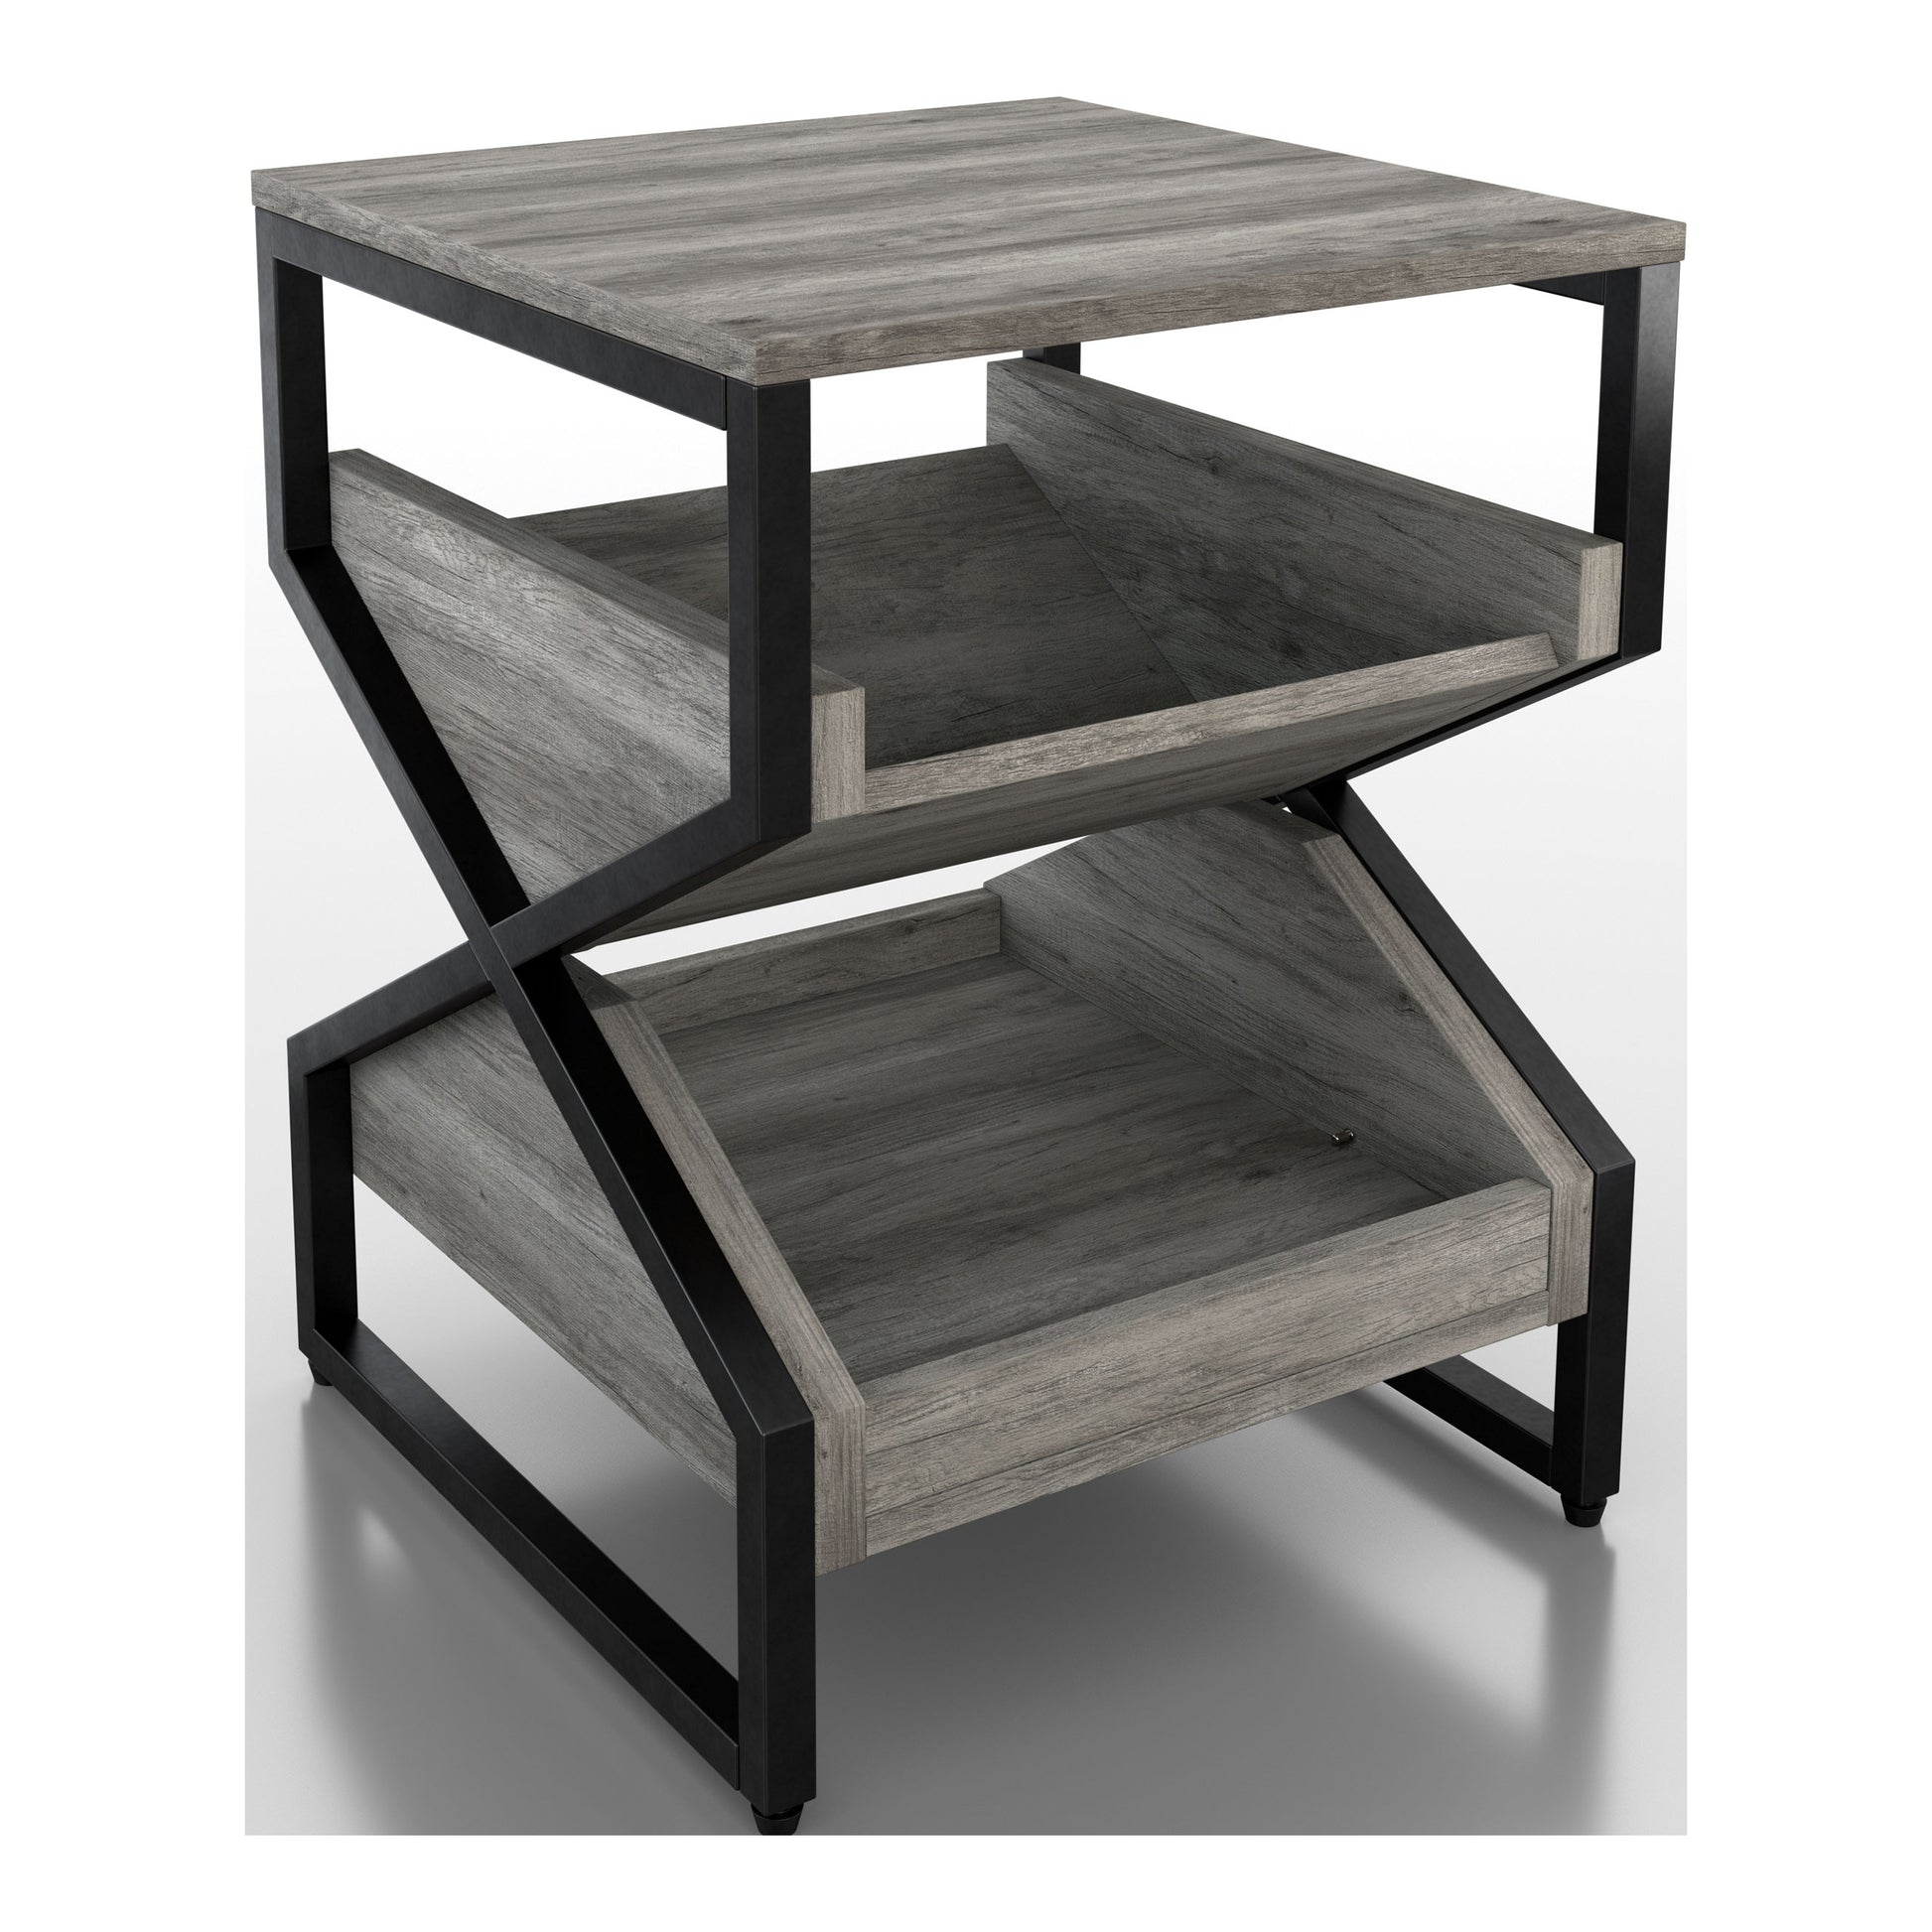 Right angled industrial vintage gray oak end table with a pull-out tray shelf on a white background